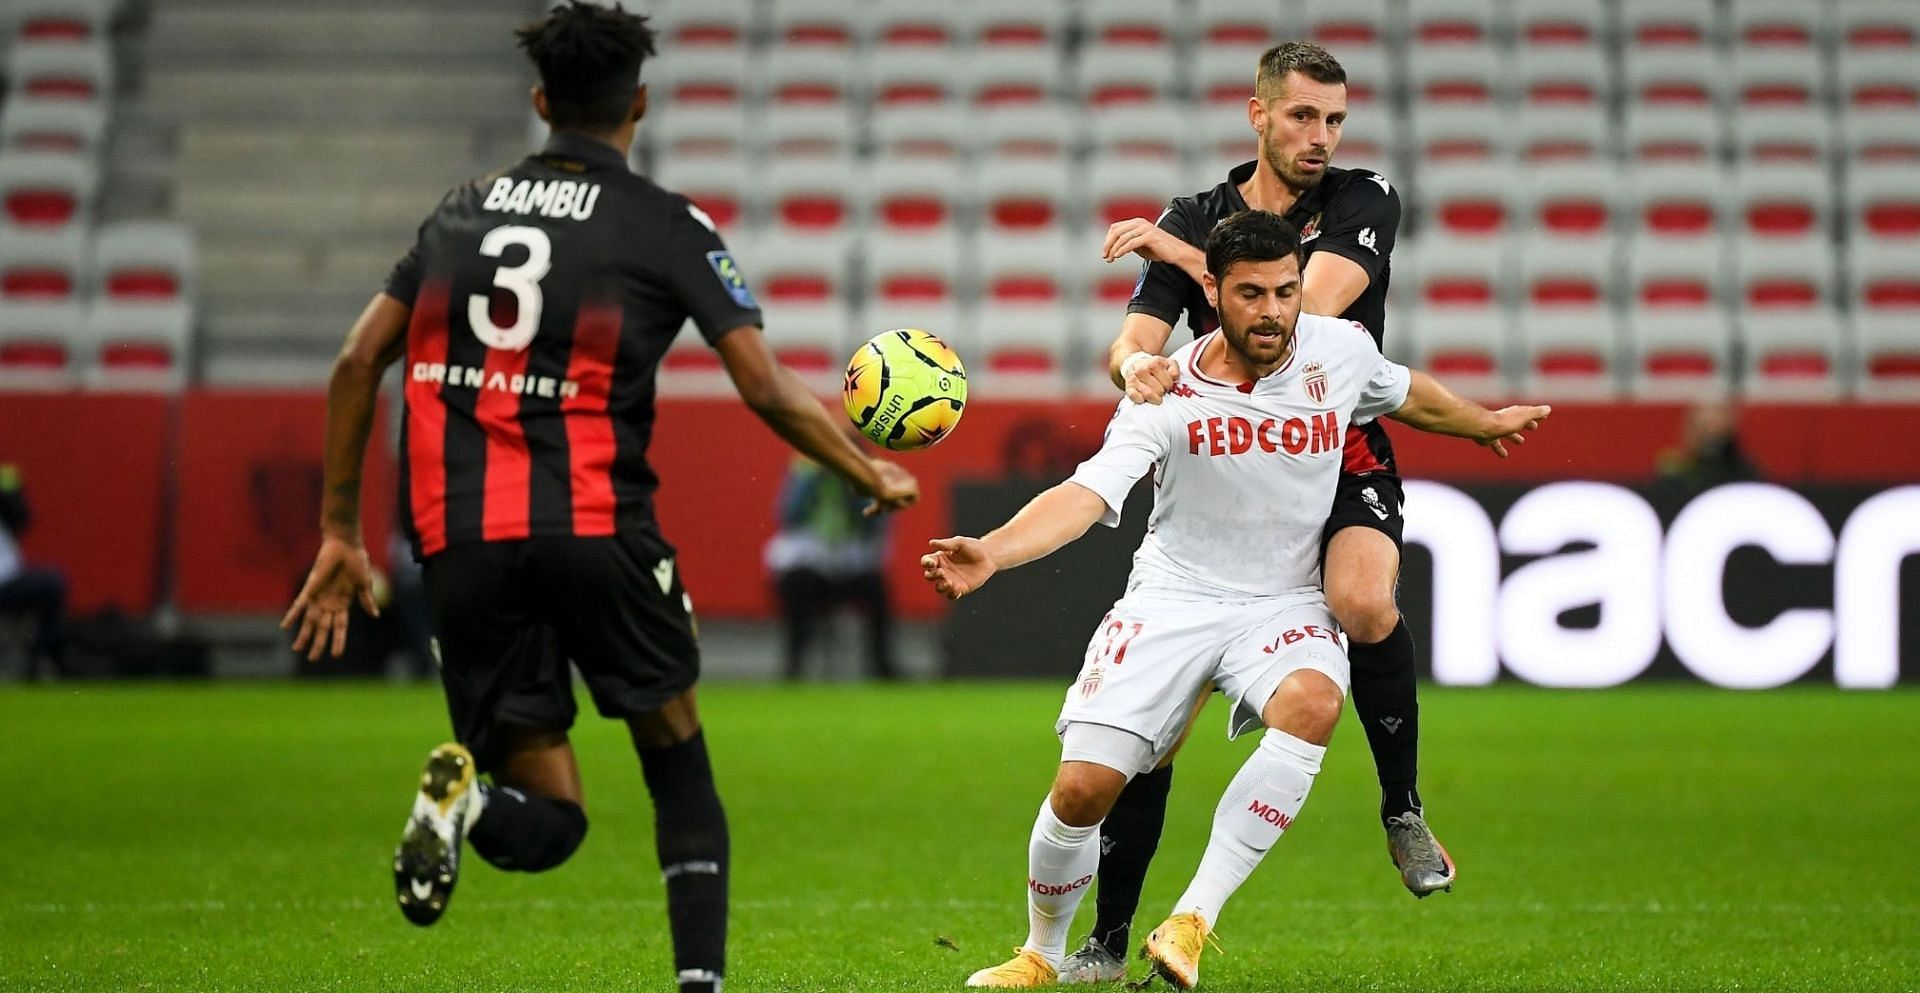 Monaco and Nice will square off in a crucial Ligue 1 fixture on Wednesday.